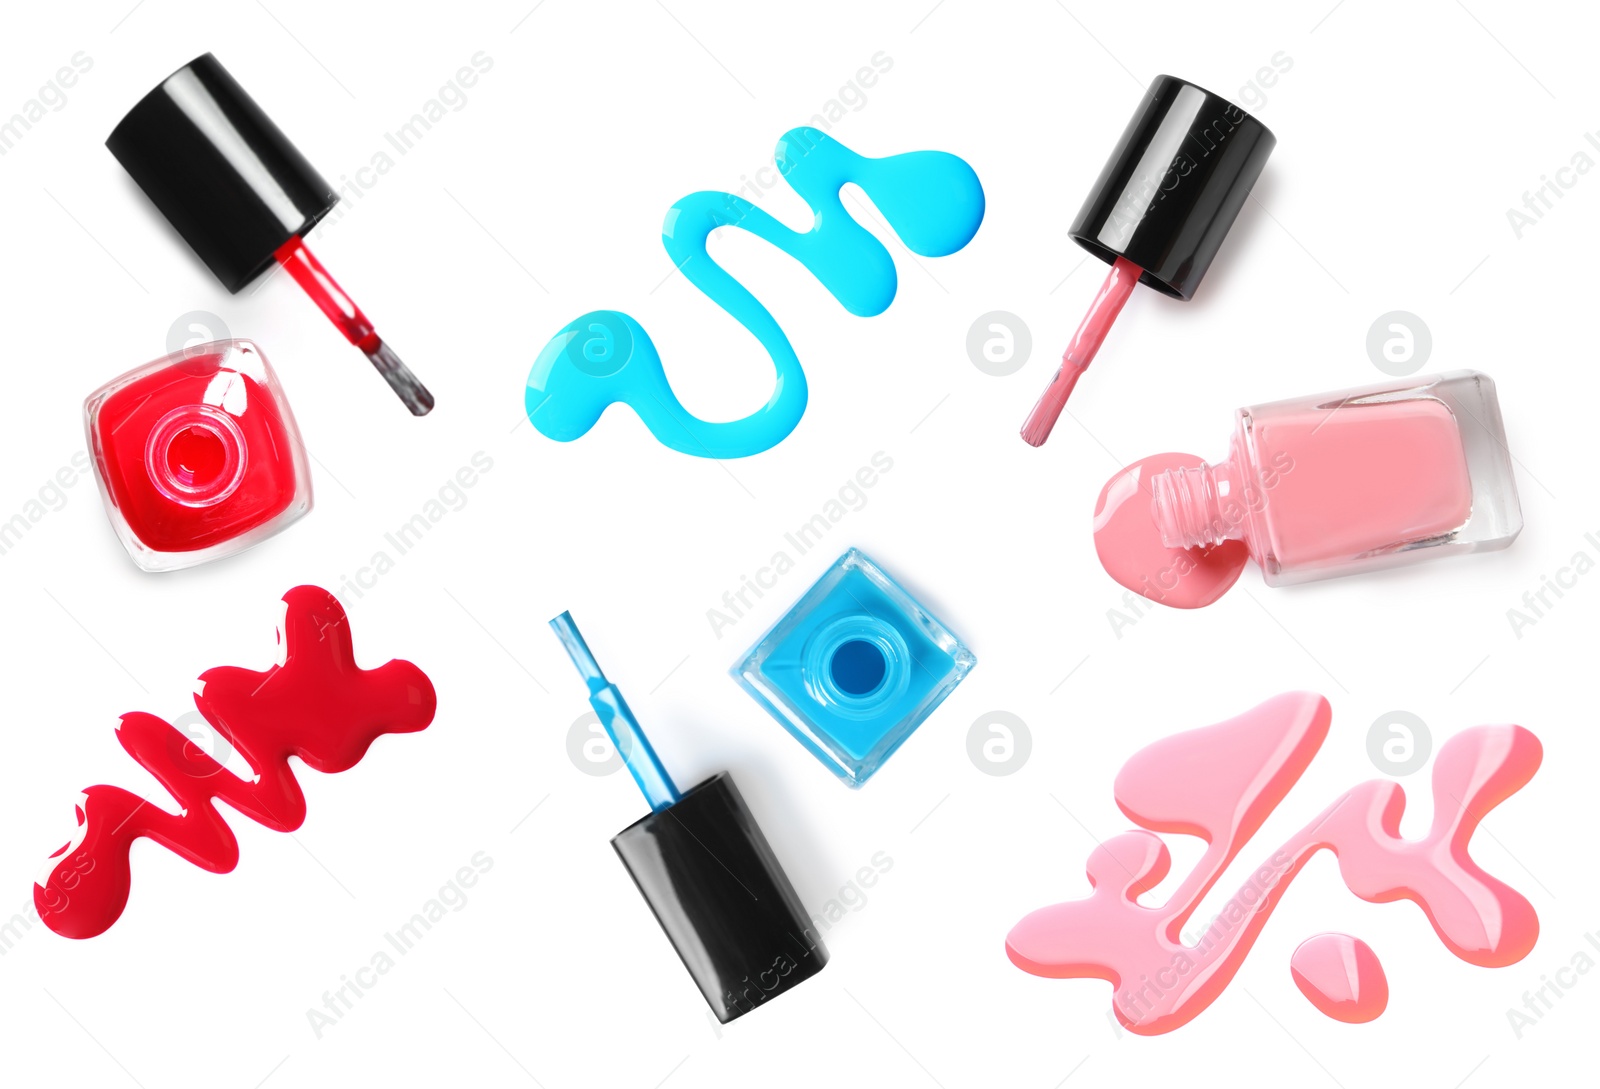 Image of Collage of different nail polishes on white background